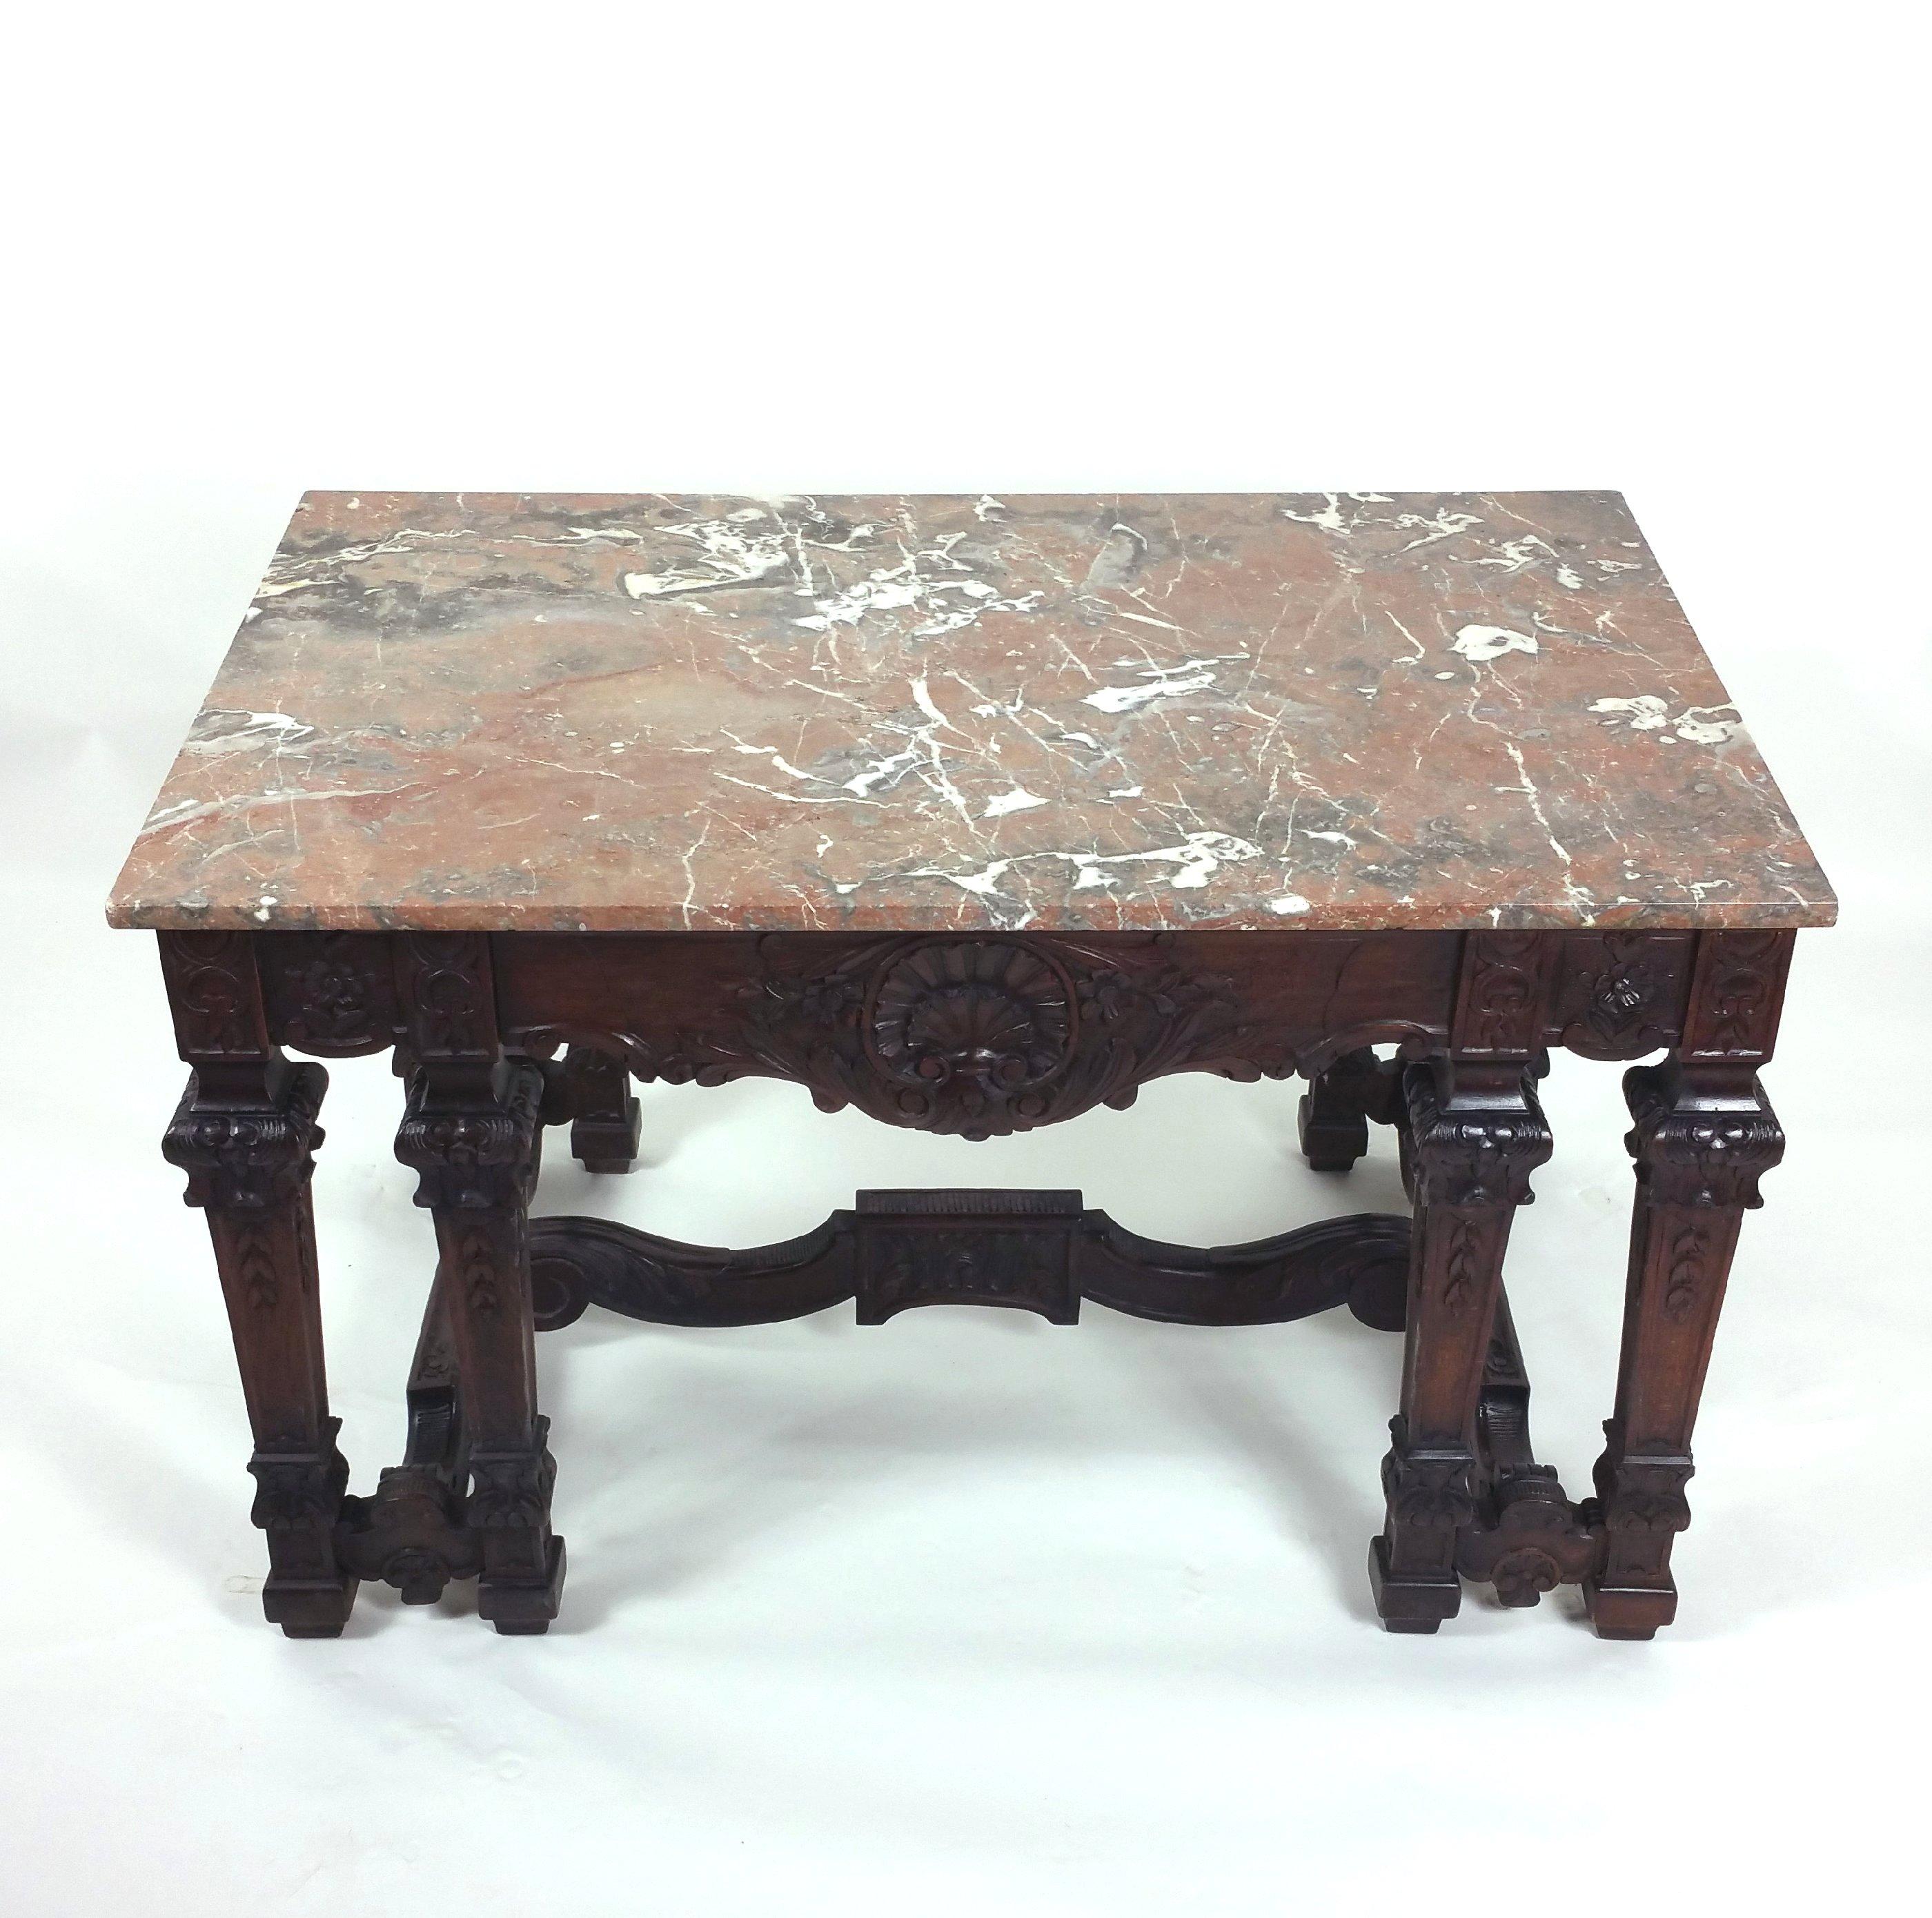 This lovely and well-proportioned mid-19th century. French walnut centre table features a reddish brown marbled top with ornate carved detailing. It stands on twin leg supports with an ‘H’ frame shaped base. The table measures 48 in – 122 cm wide,